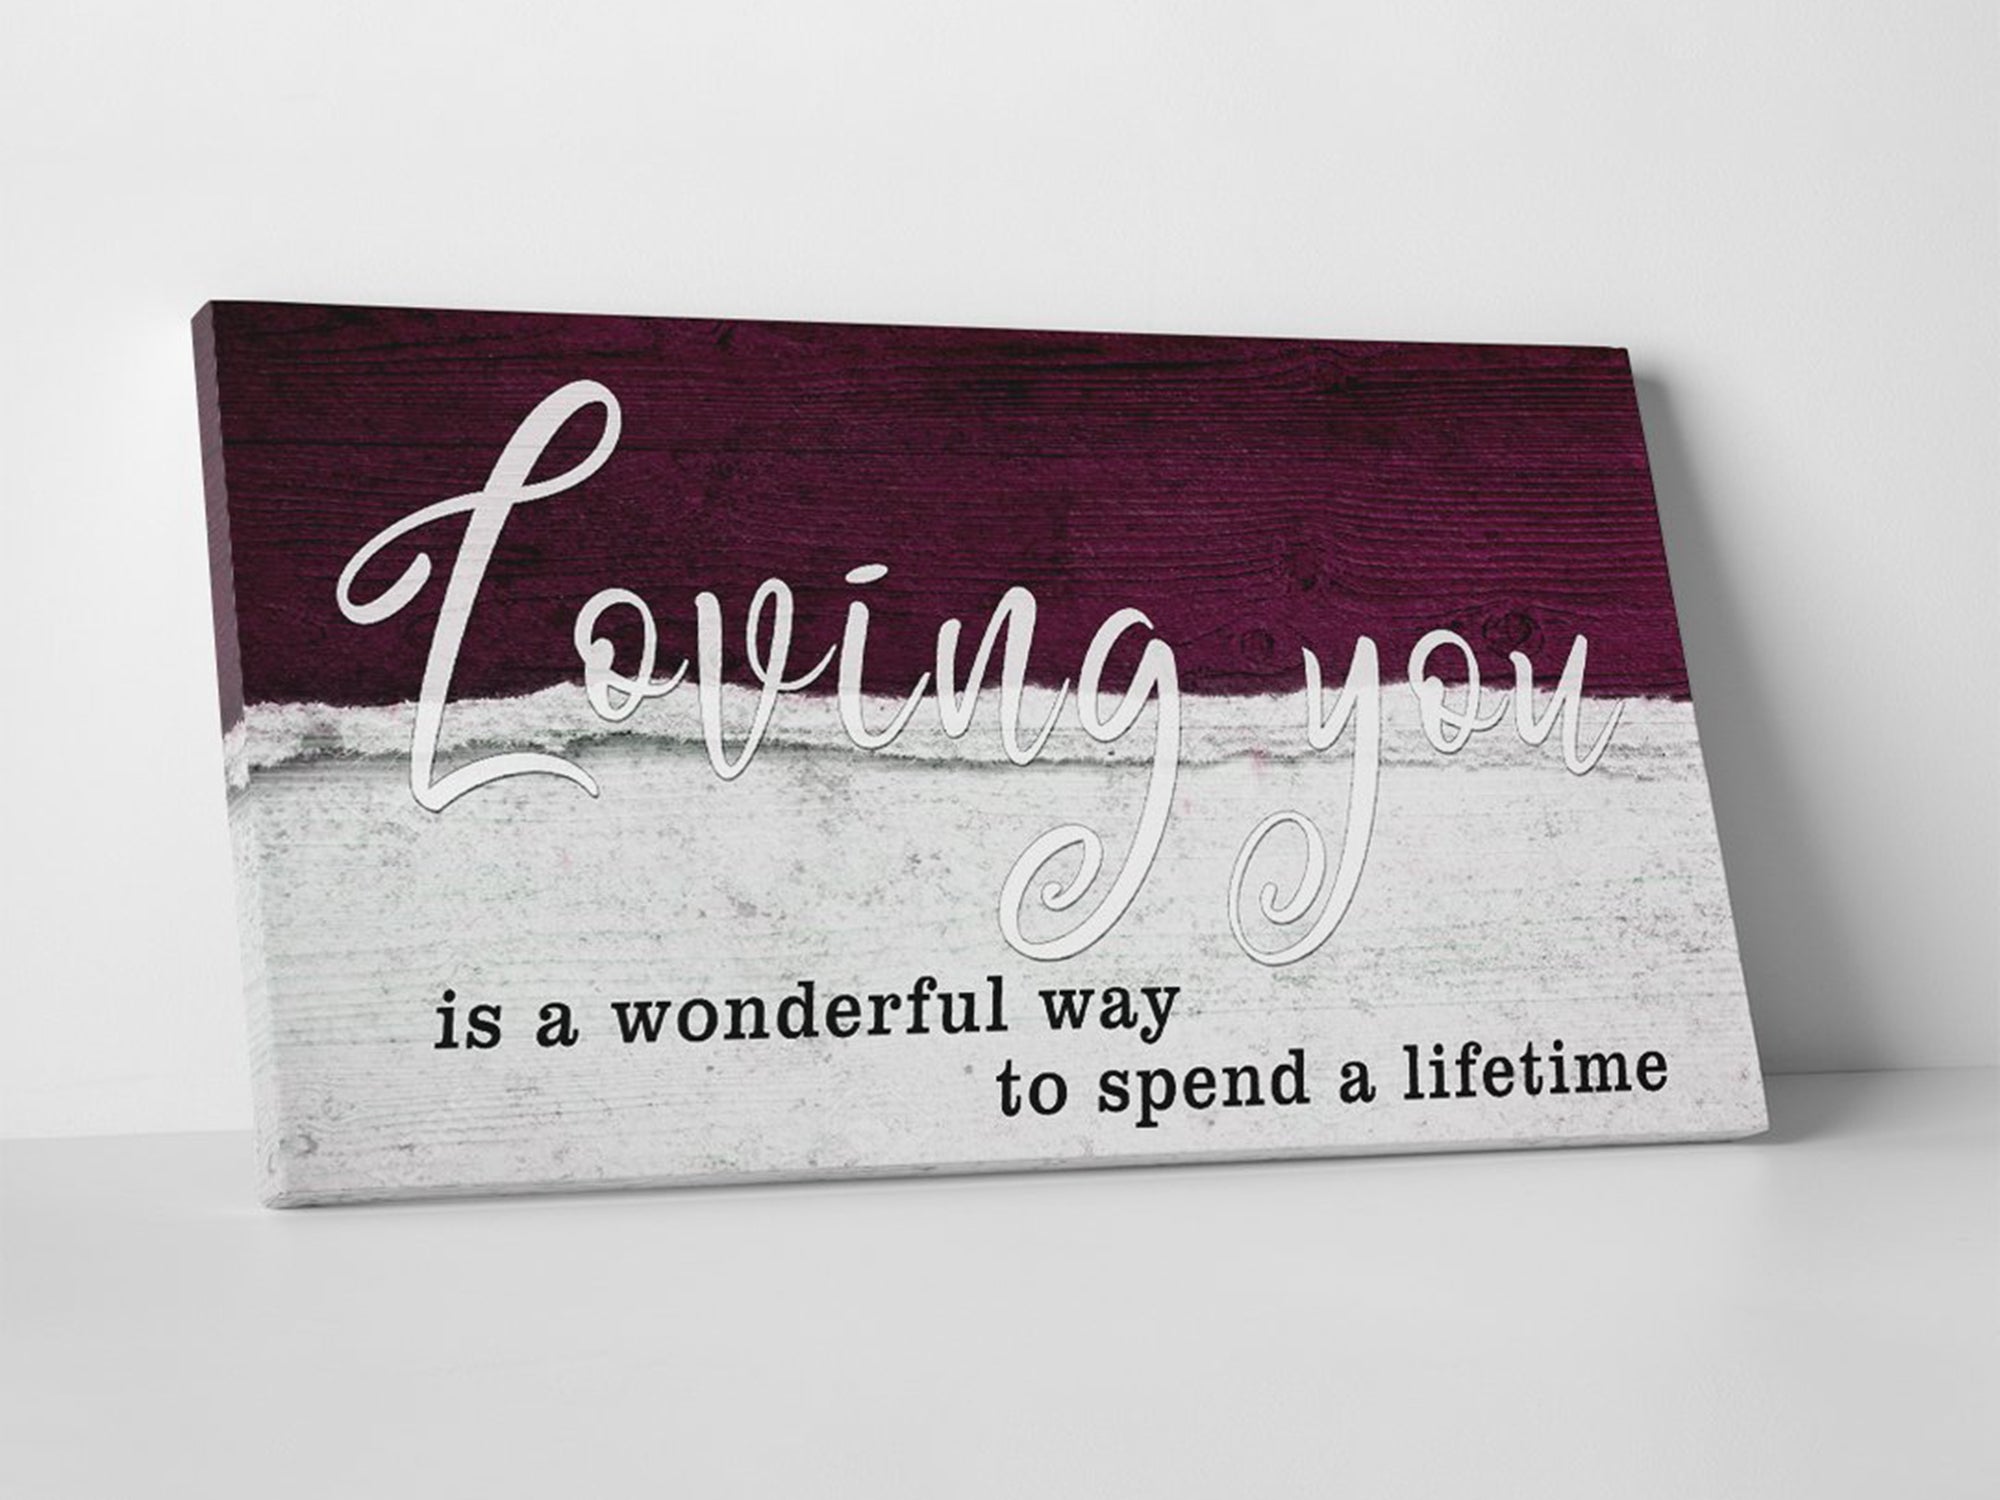 Loving You A Lifetime - Couples Wall Art For Bedroom